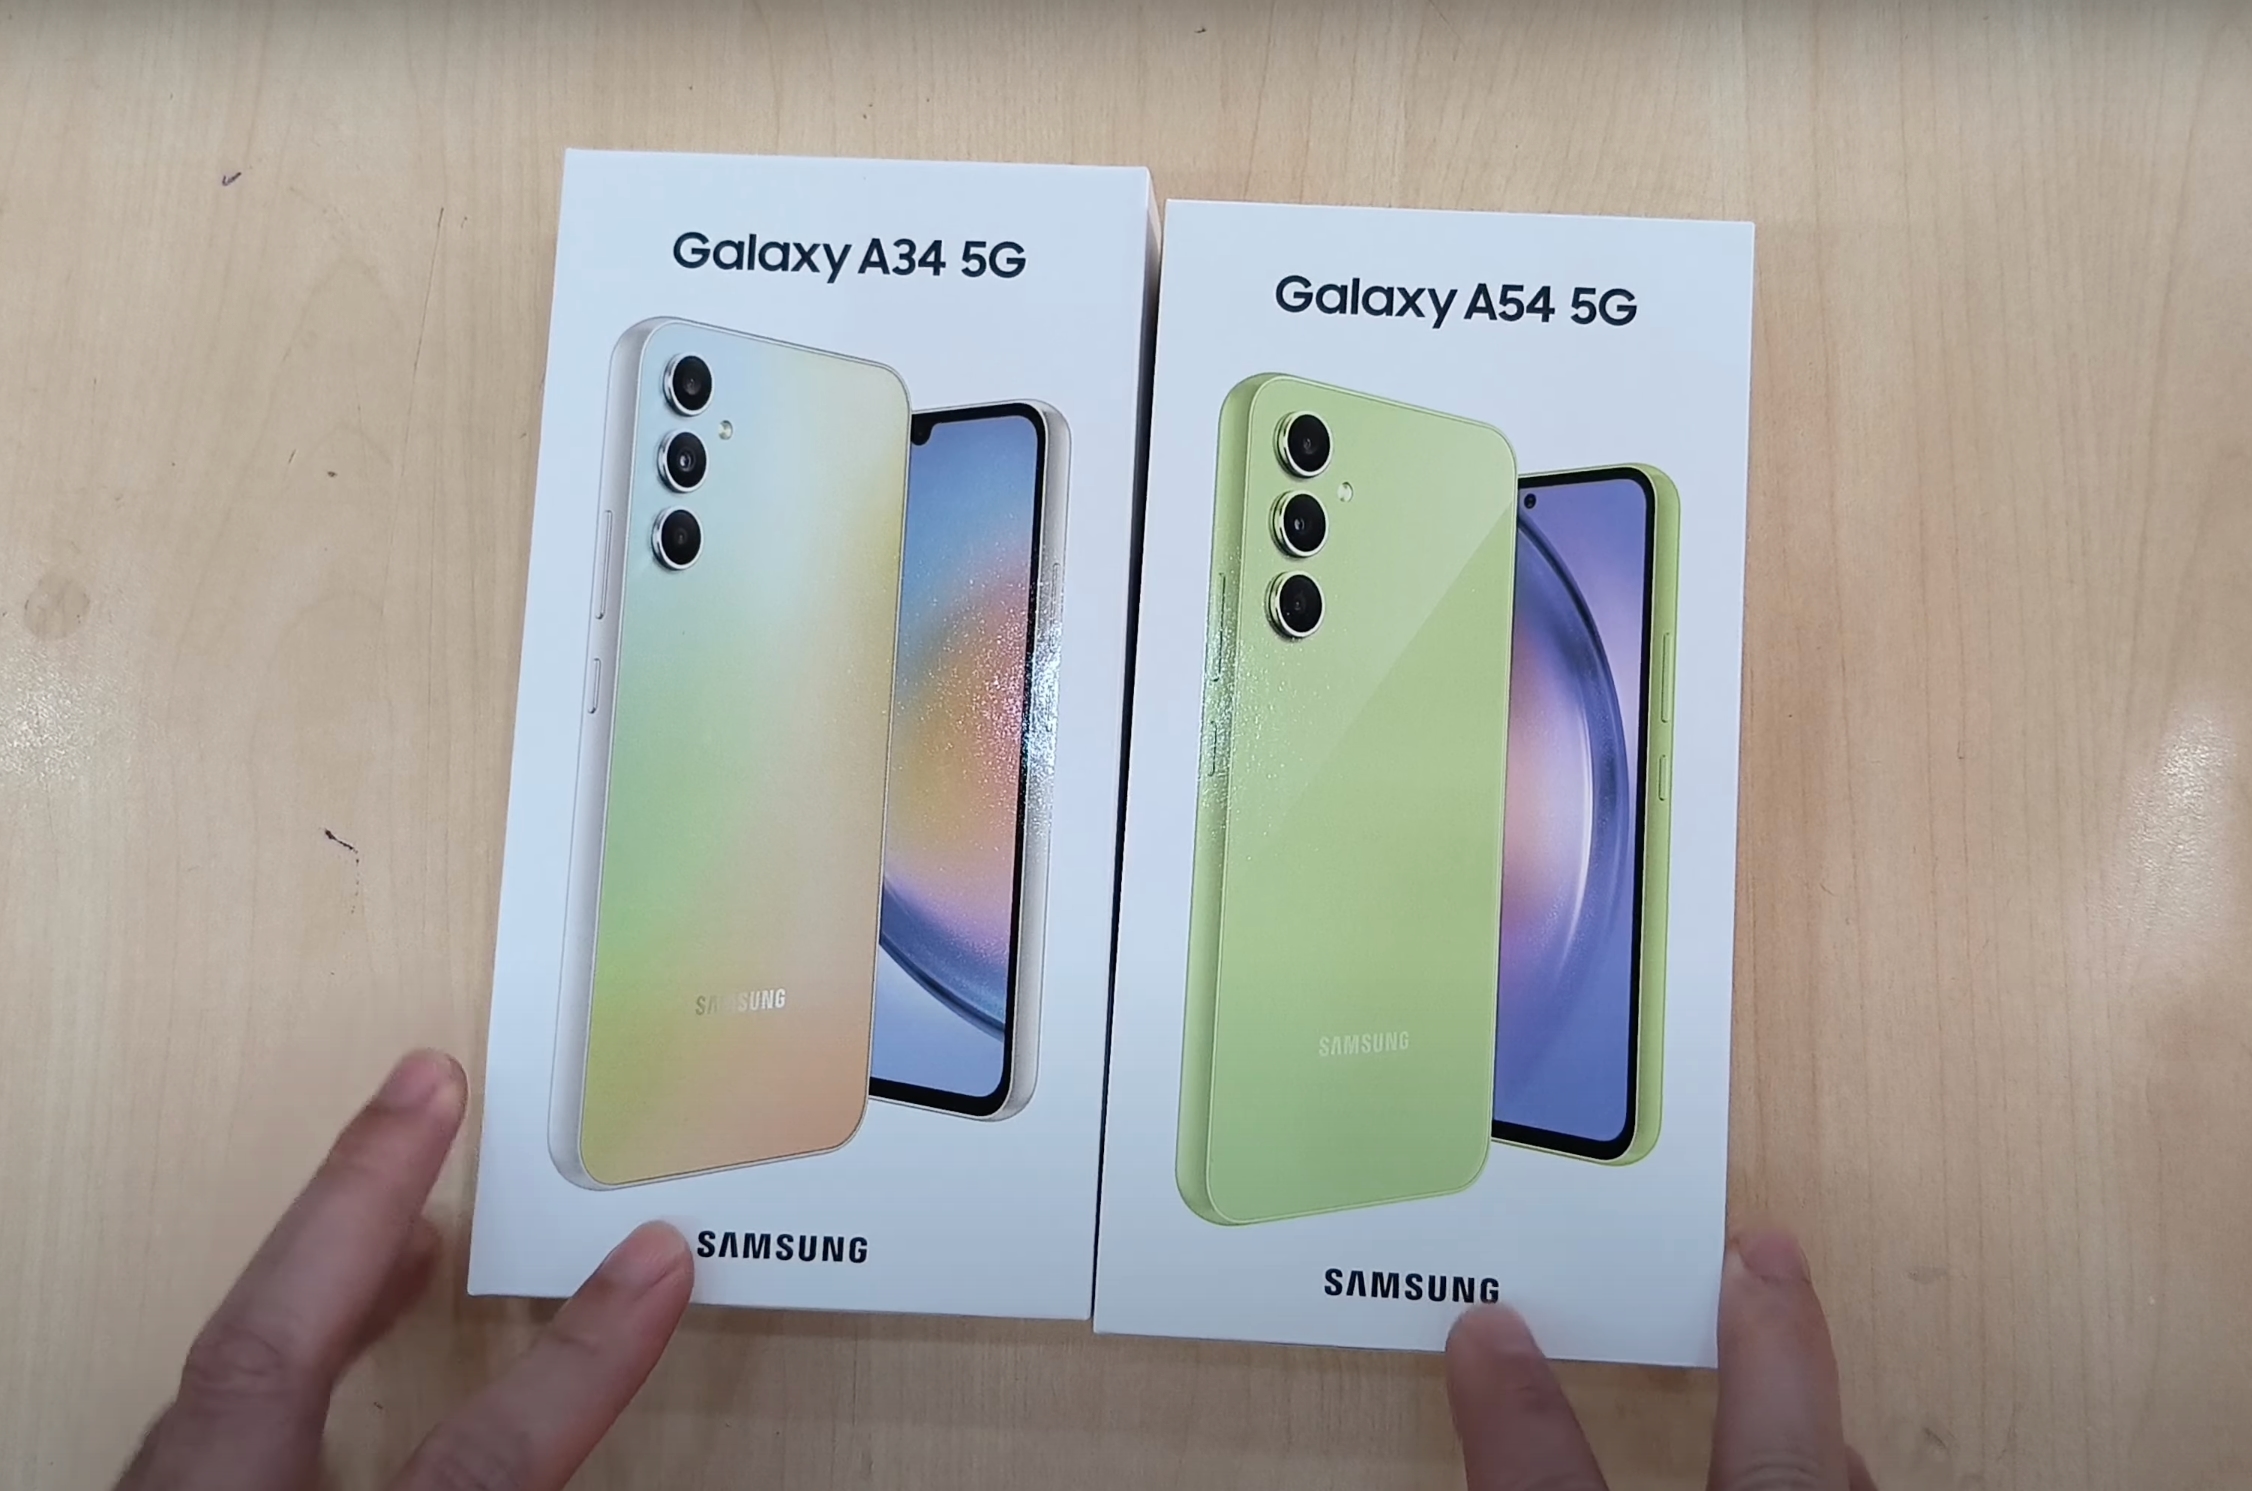 Three days before unveiling: a video of the Galaxy A34 and Galaxy A54 unboxing has surfaced online